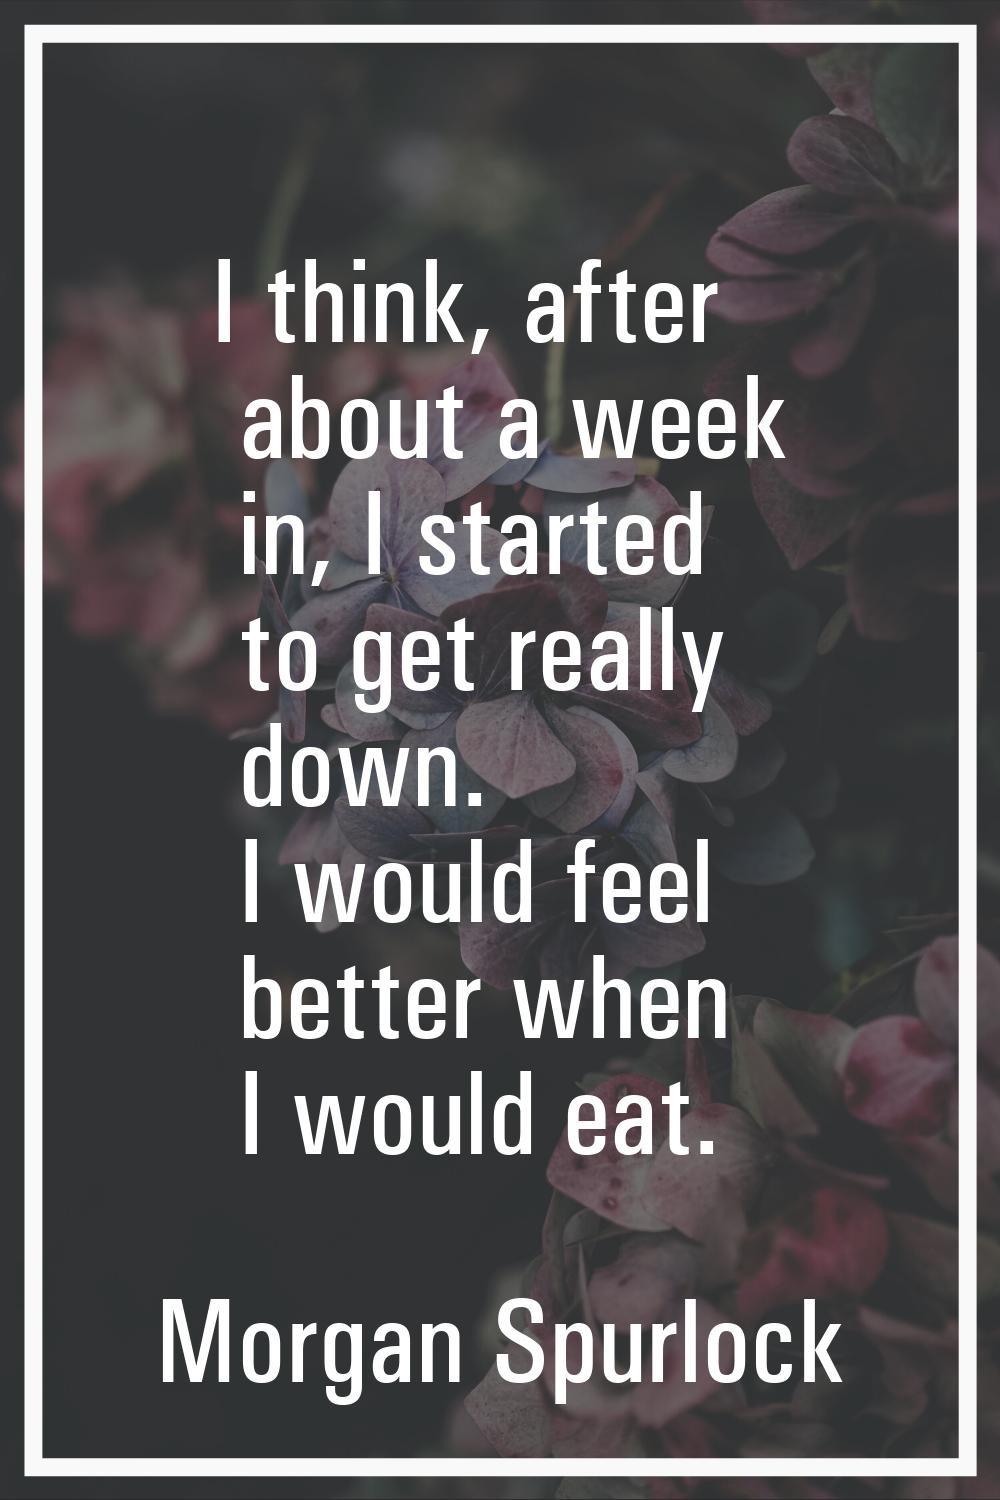 I think, after about a week in, I started to get really down. I would feel better when I would eat.